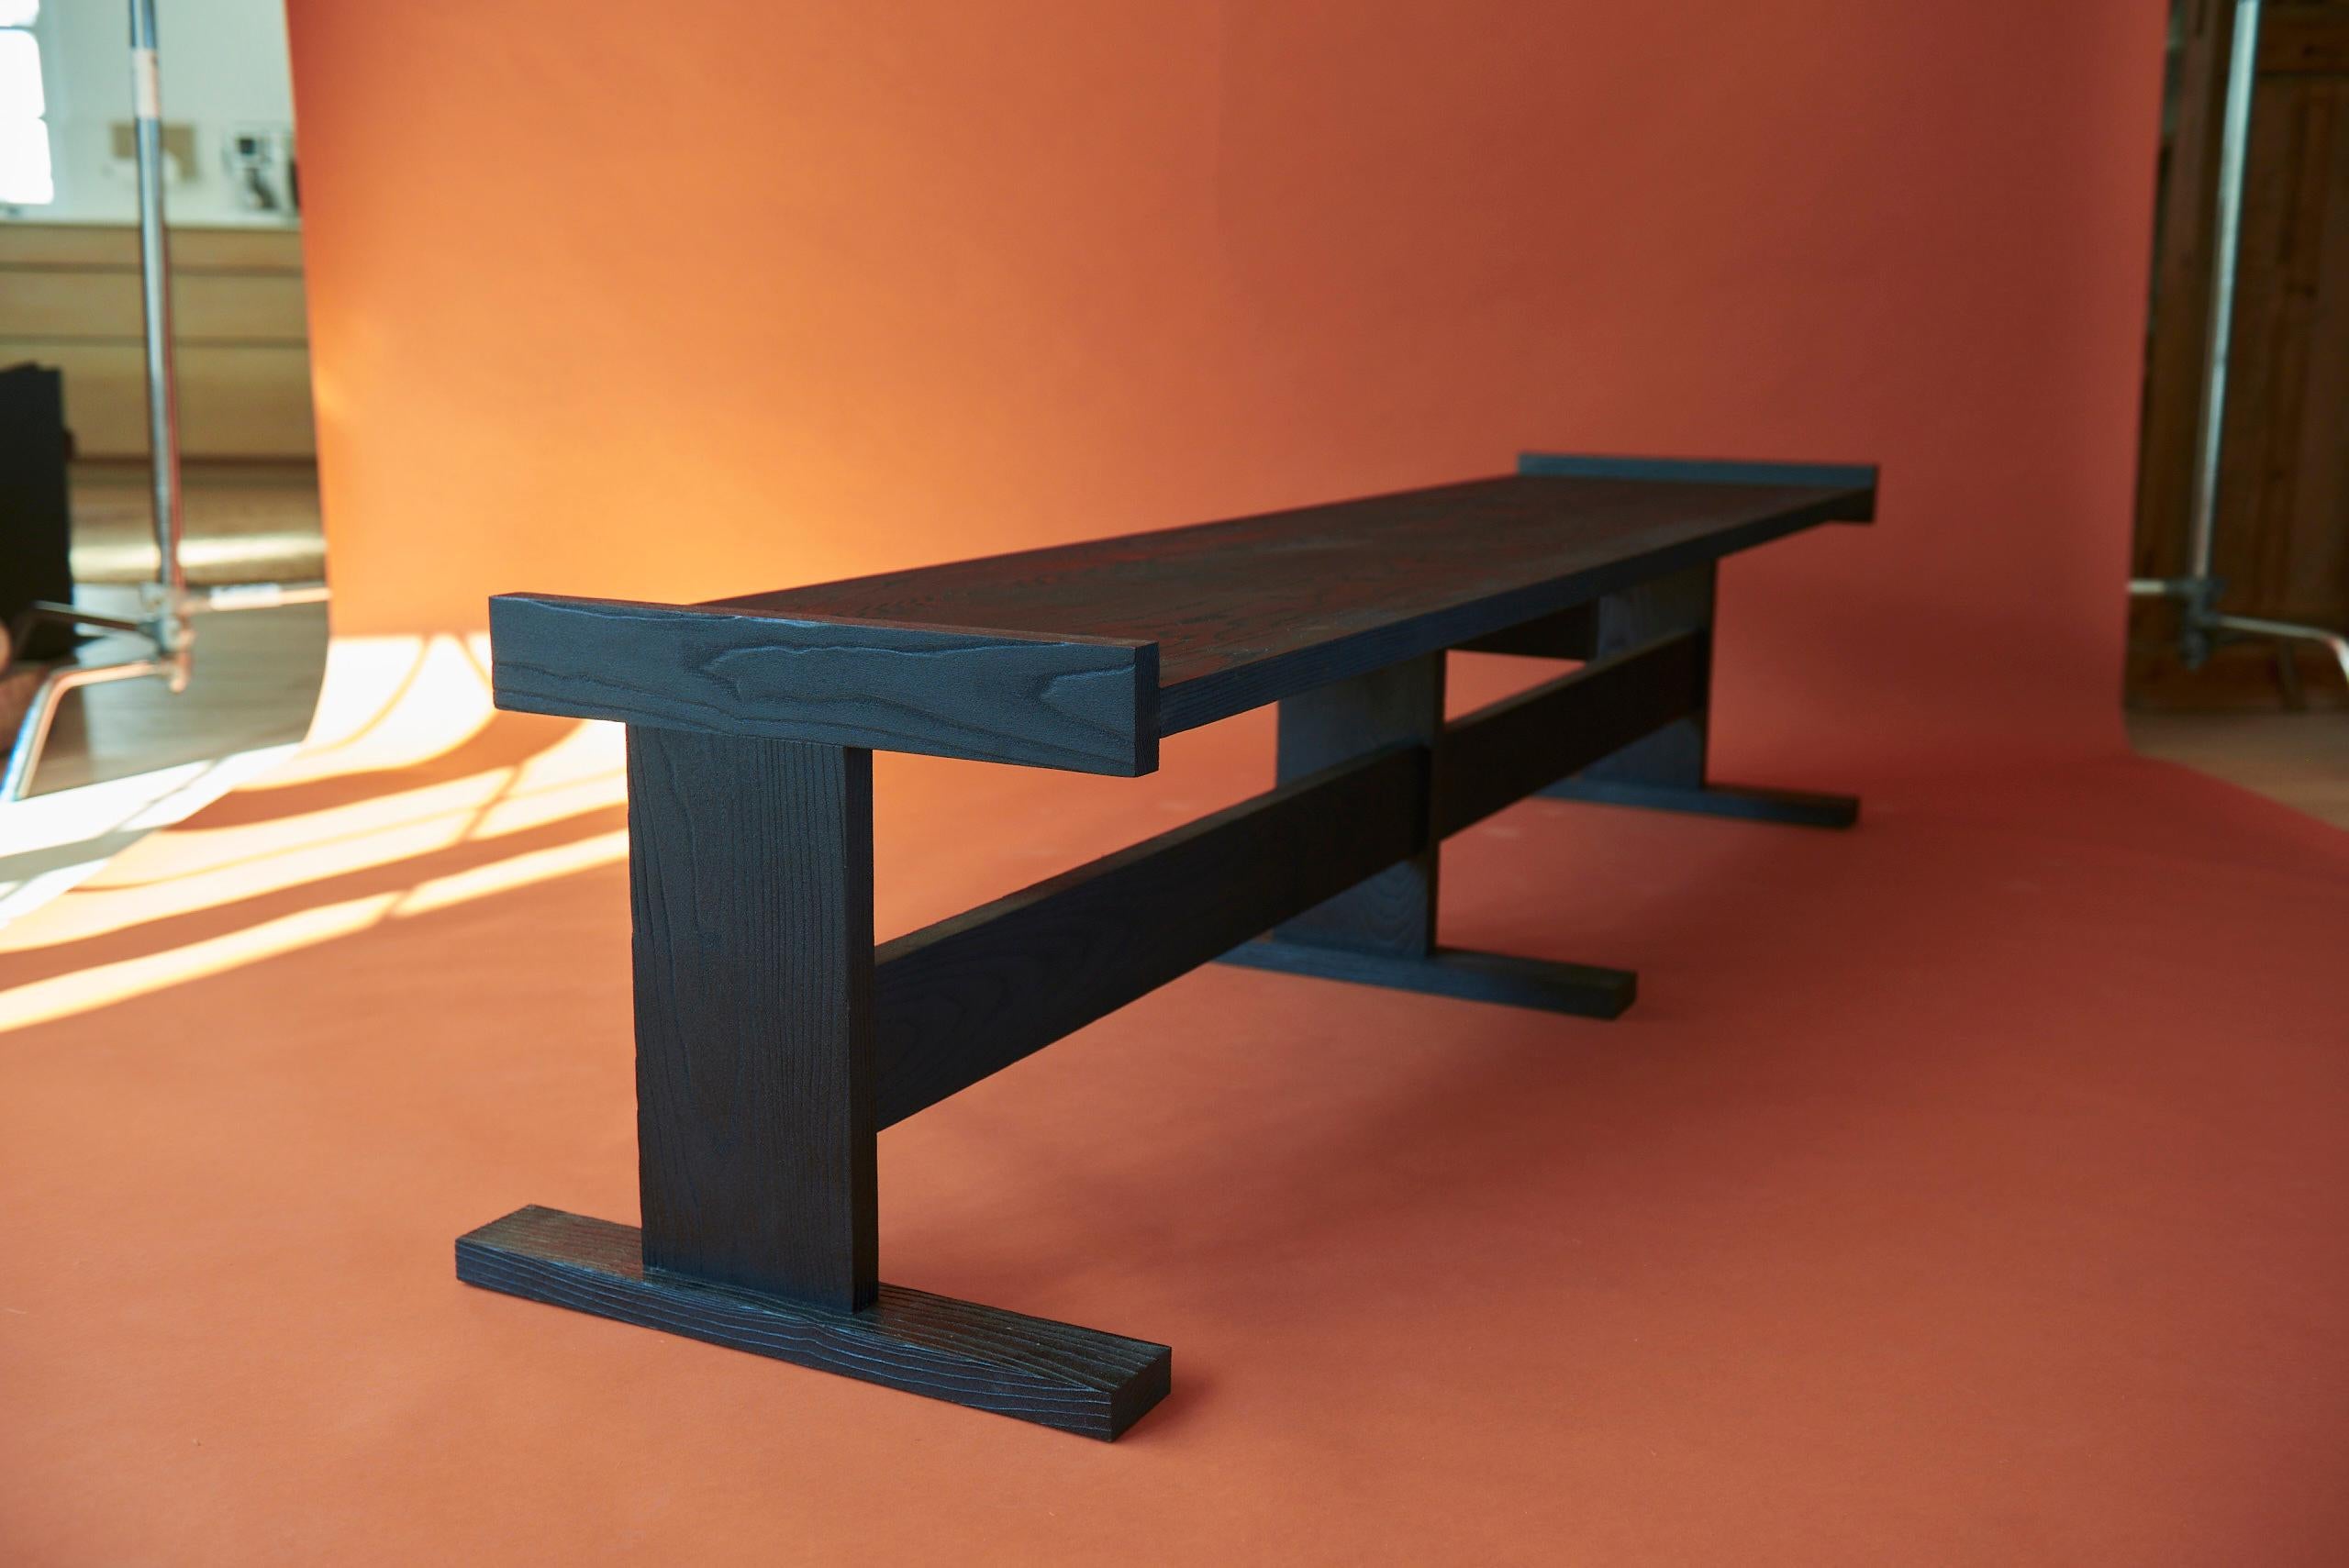 Ash Kyra Bench by Nish Studio
Dimensions: W 51.5 x D 207 x H 47.5cm.
Materials: Carbon stained + Sand Blasted Ash
**Price without cushion. 

N I S H is a Cape Town based Fashion and Furniture design studio. N I S H creates contemporary, elegant and